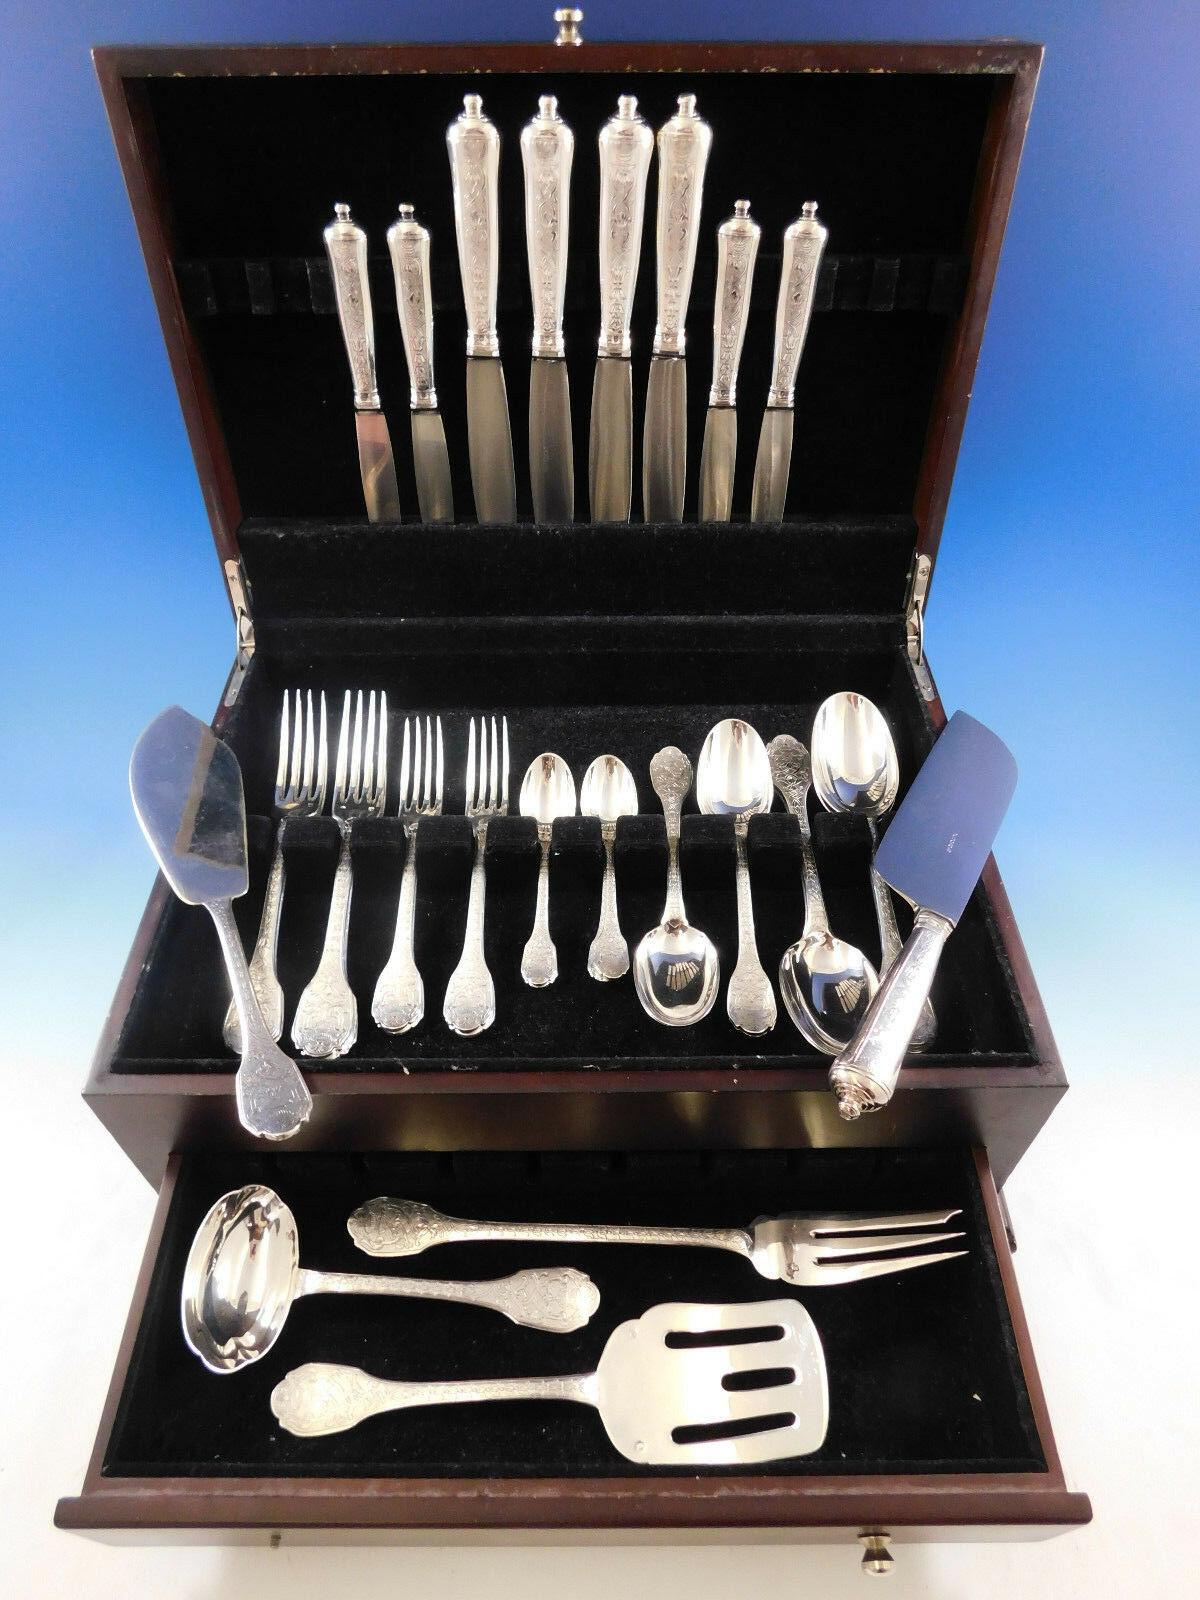 Soubise by Puiforcat France sterling silver Flatware set, 33 pieces. Great starter set. This set includes:

4 dinner size knives with cannon handles, 9 3/4